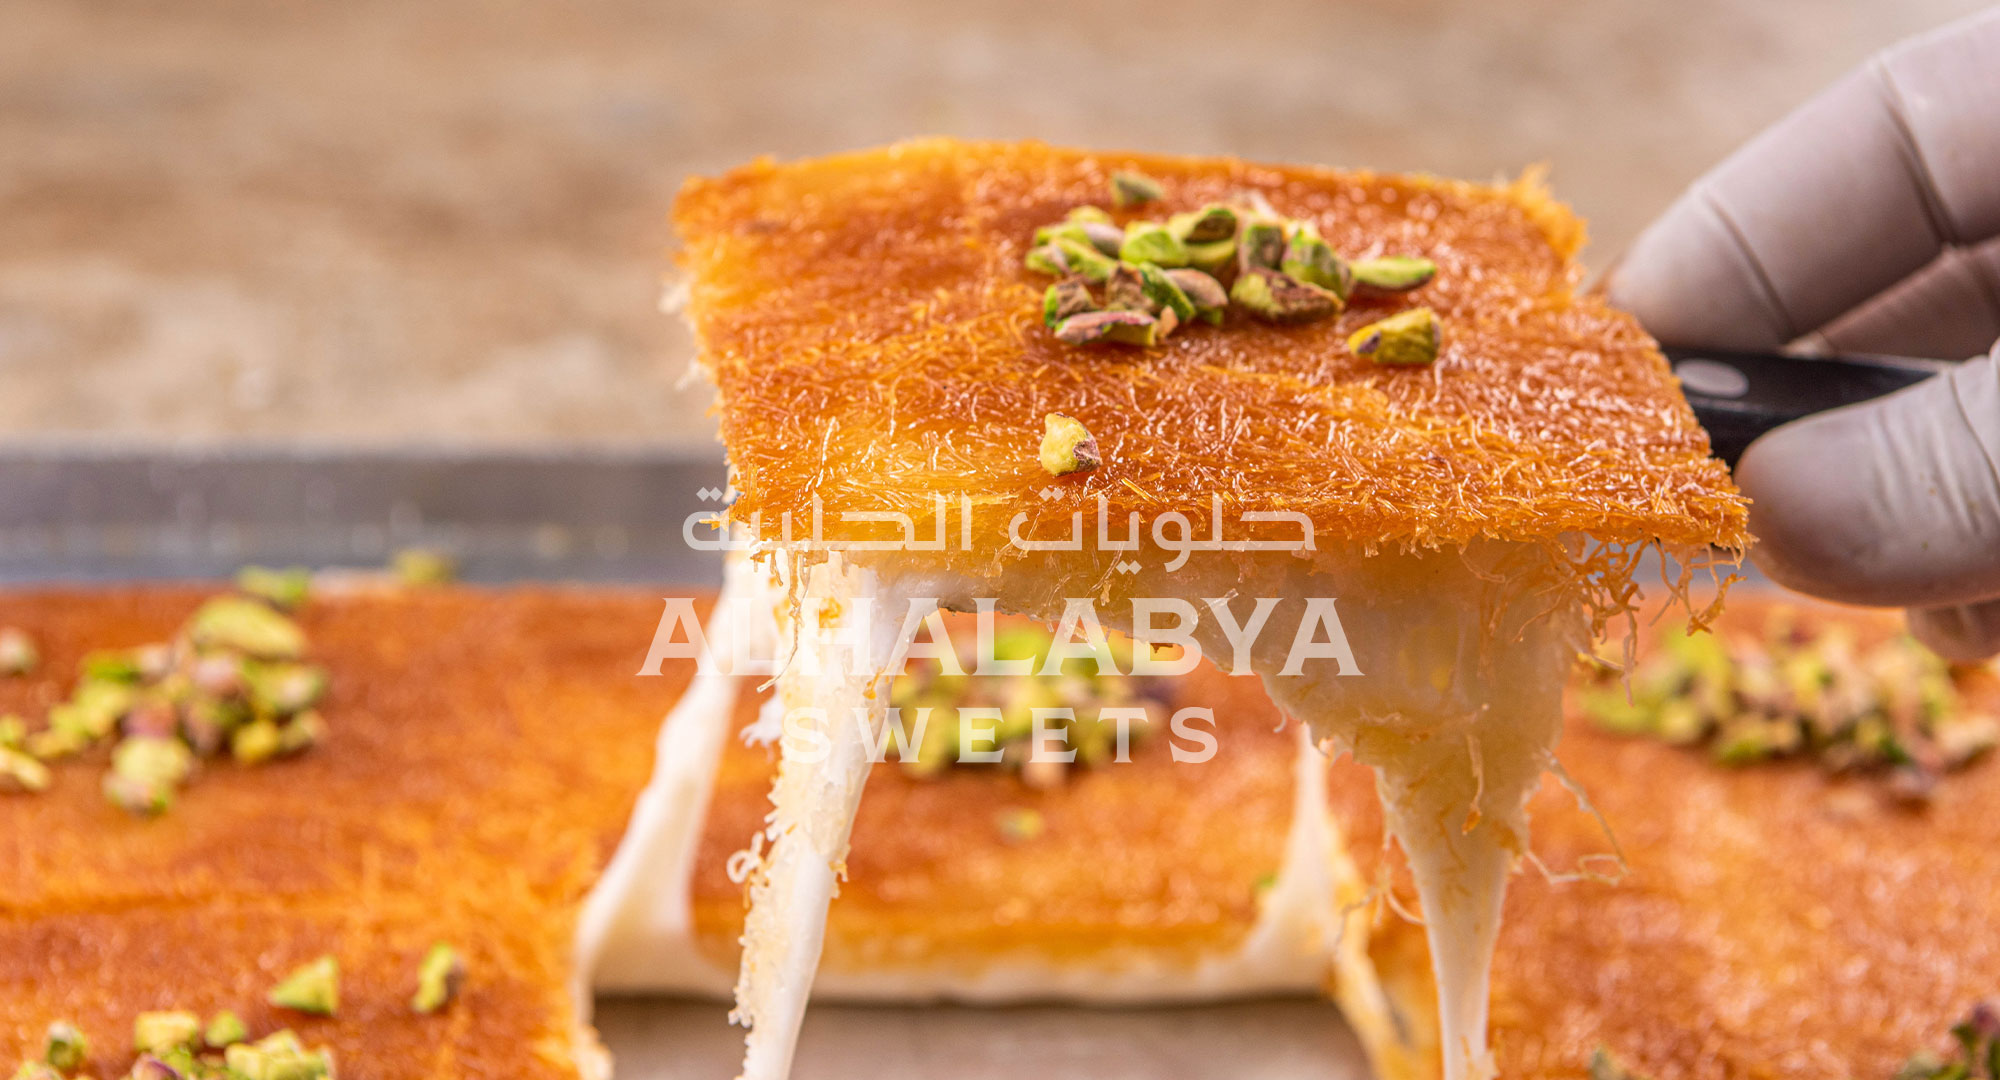 Crafting Quality: Behind the Scenes at Al Halabya Sweets